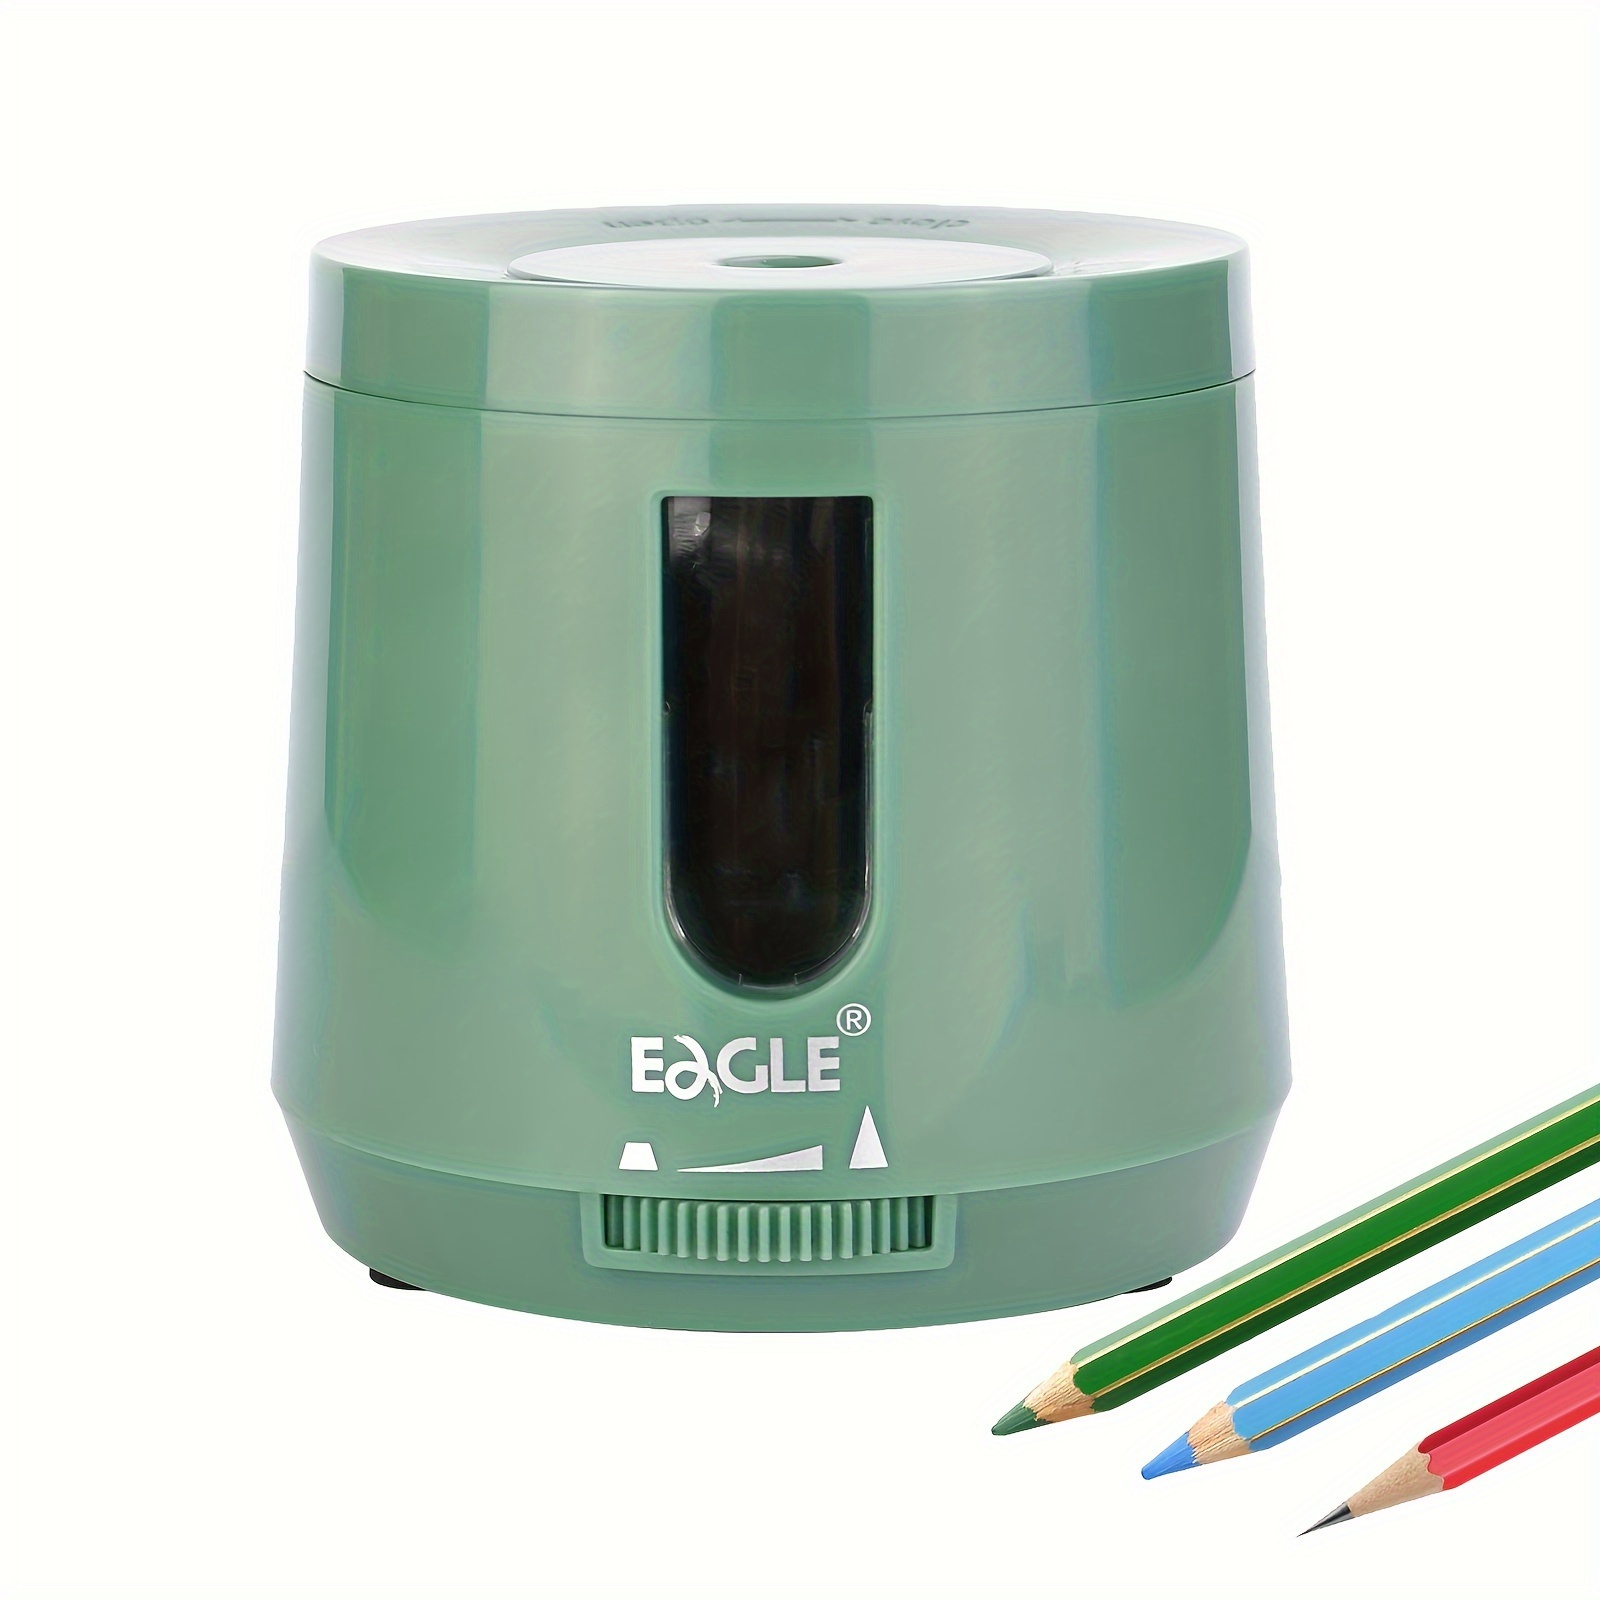 

Eagle Electric Pencil Sharpener, Battery/usb Operated, Blade To Fast Sharpen, Portable Automatic Pencil Sharpener For Colored Pencils (6-8mm ), School/classroom/office/home